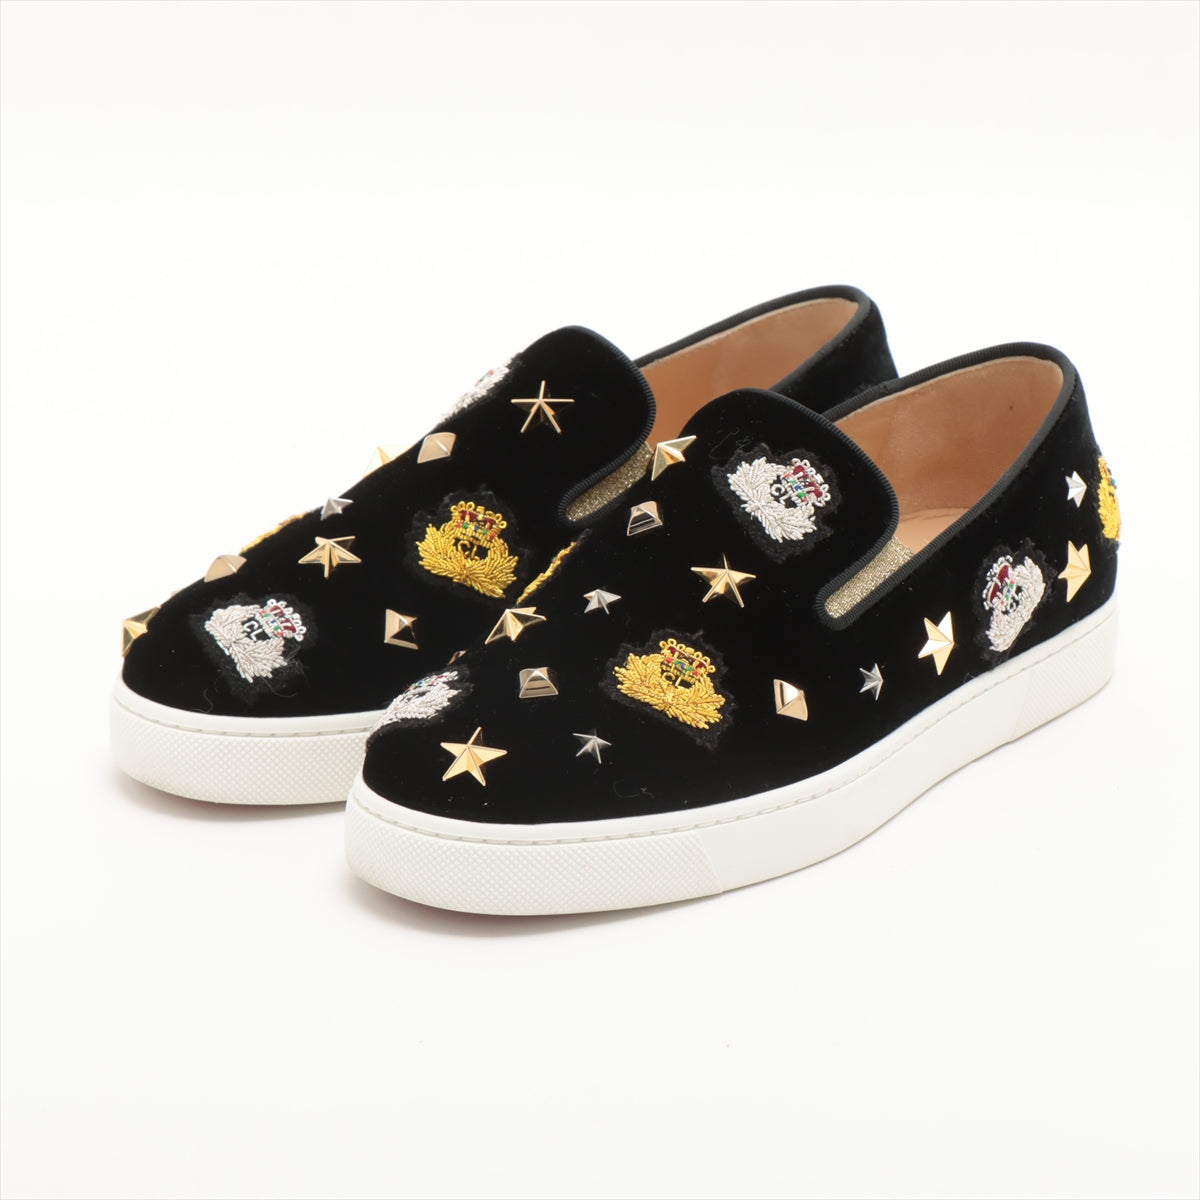 Christian Louboutin Velour Slip-on 36 Ladies' Black Miss Academy Studs Box sack There are replacement studs